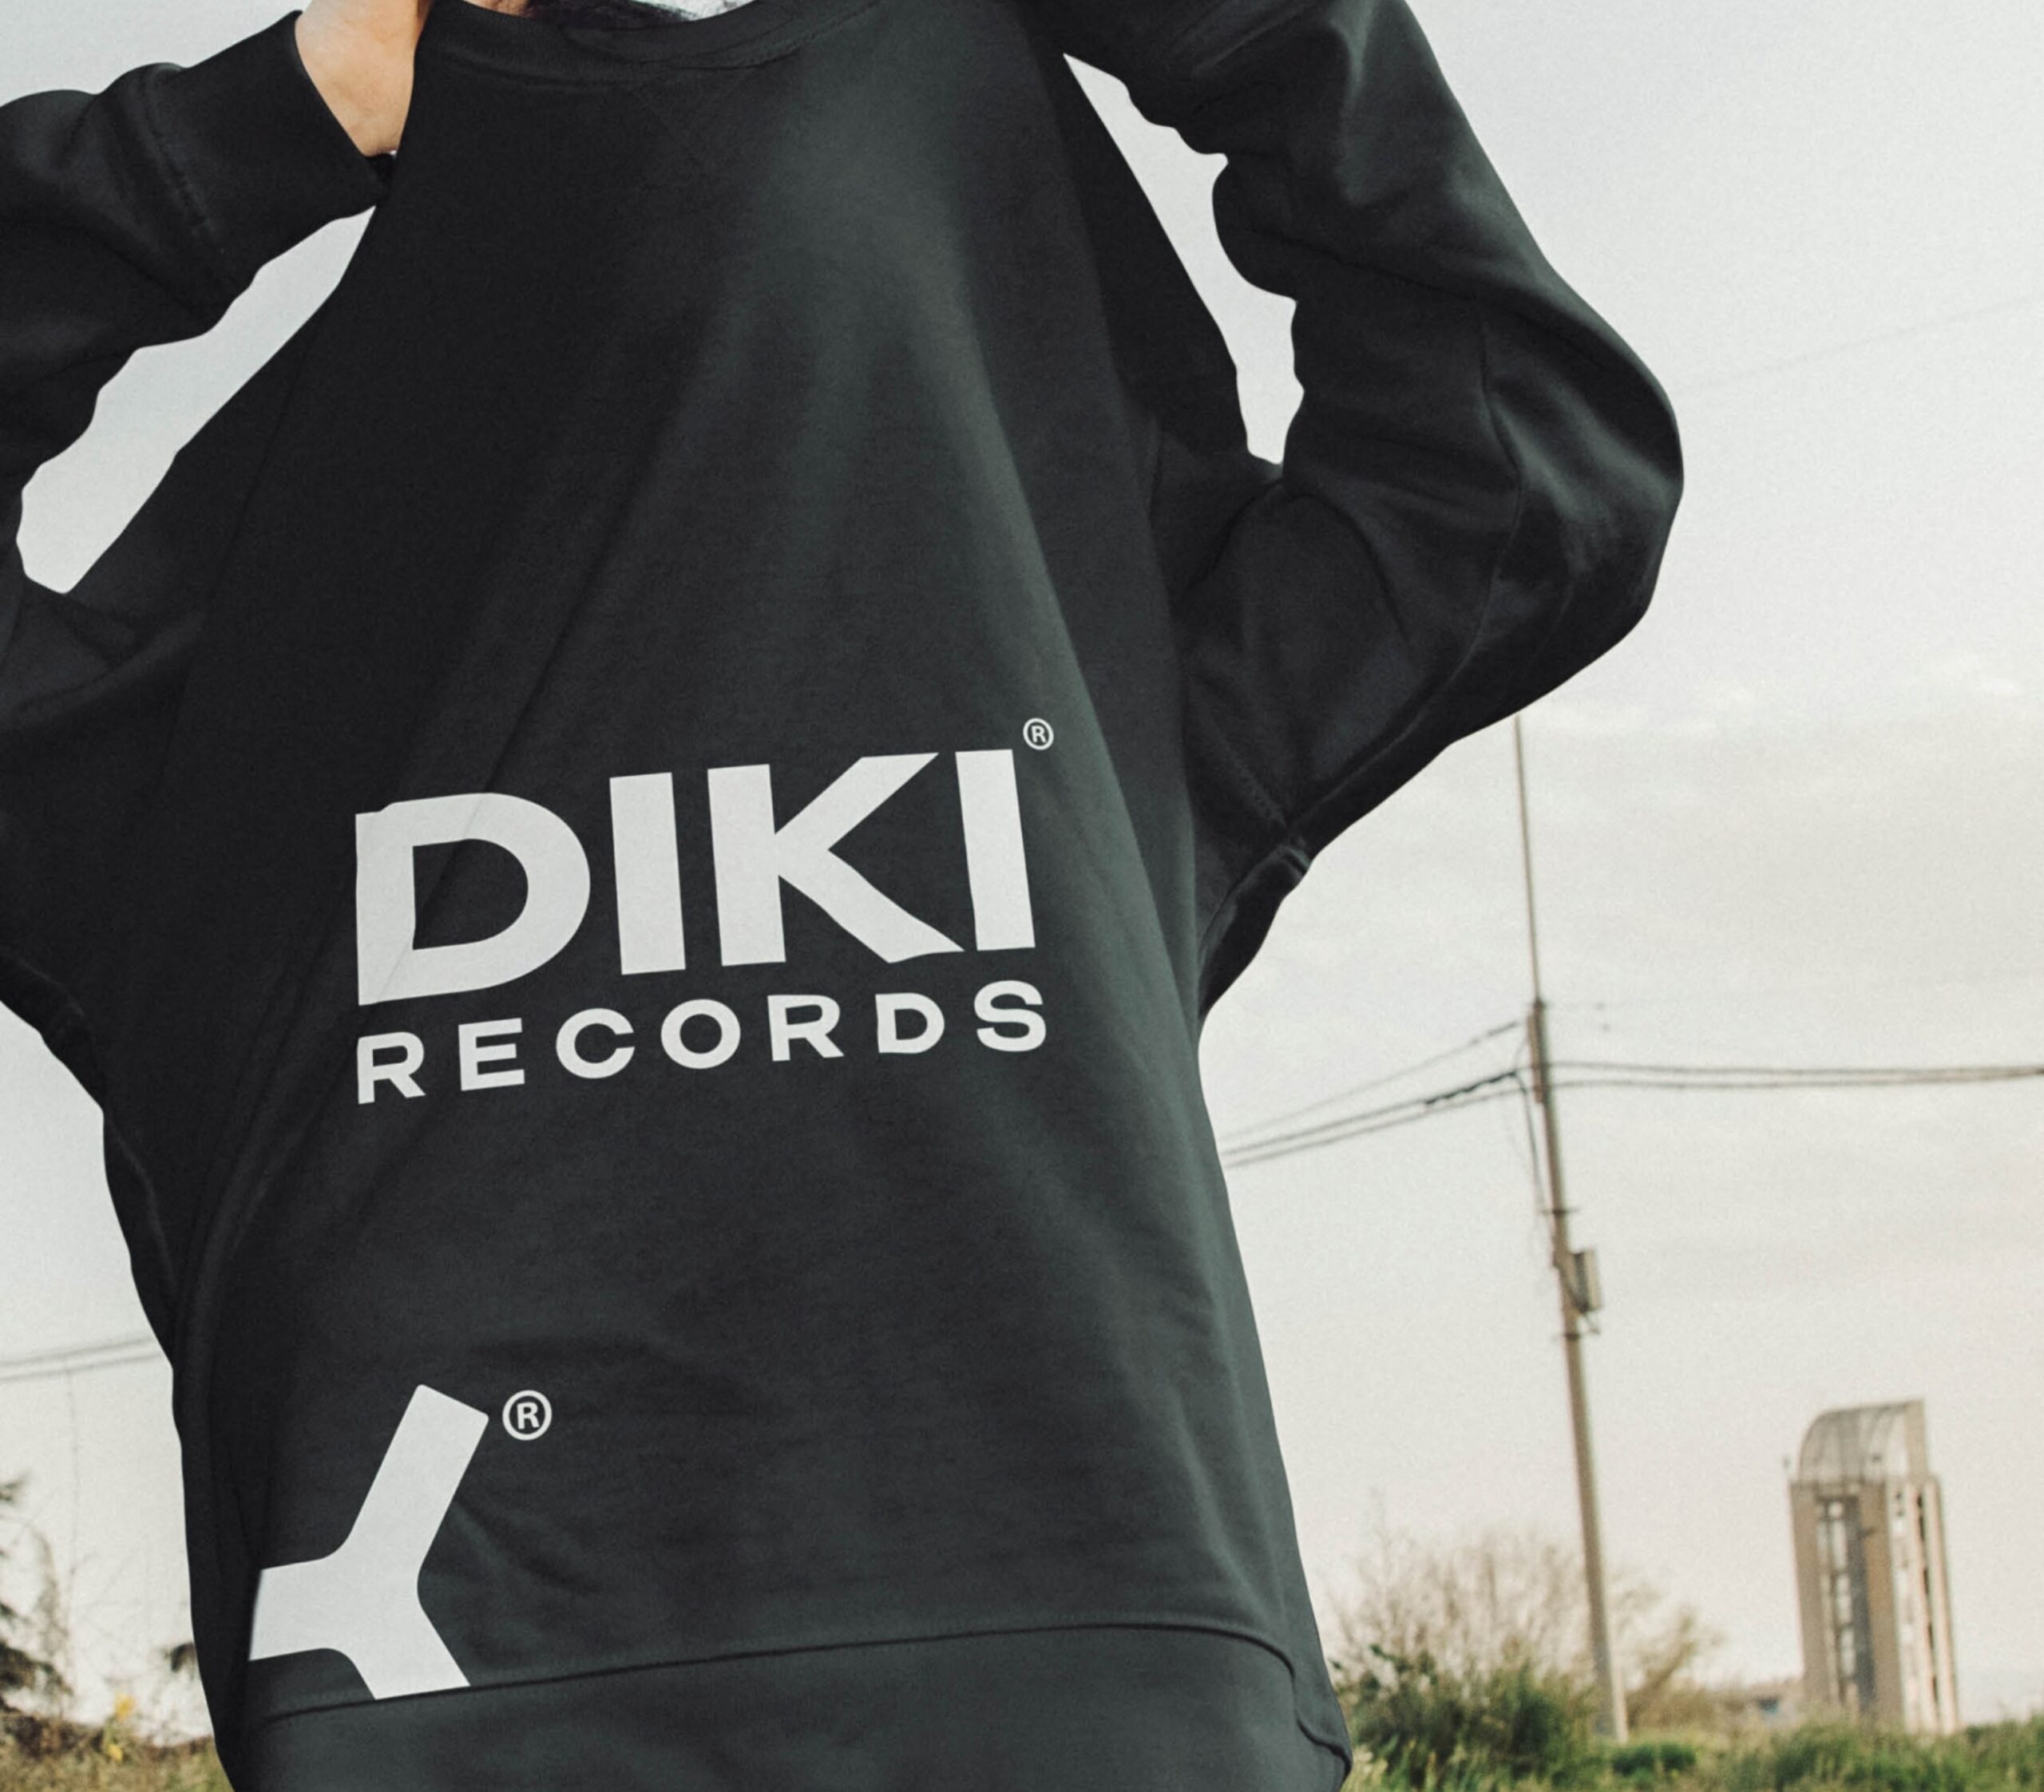 DIKI RECORDS FORT07 26 1804x0